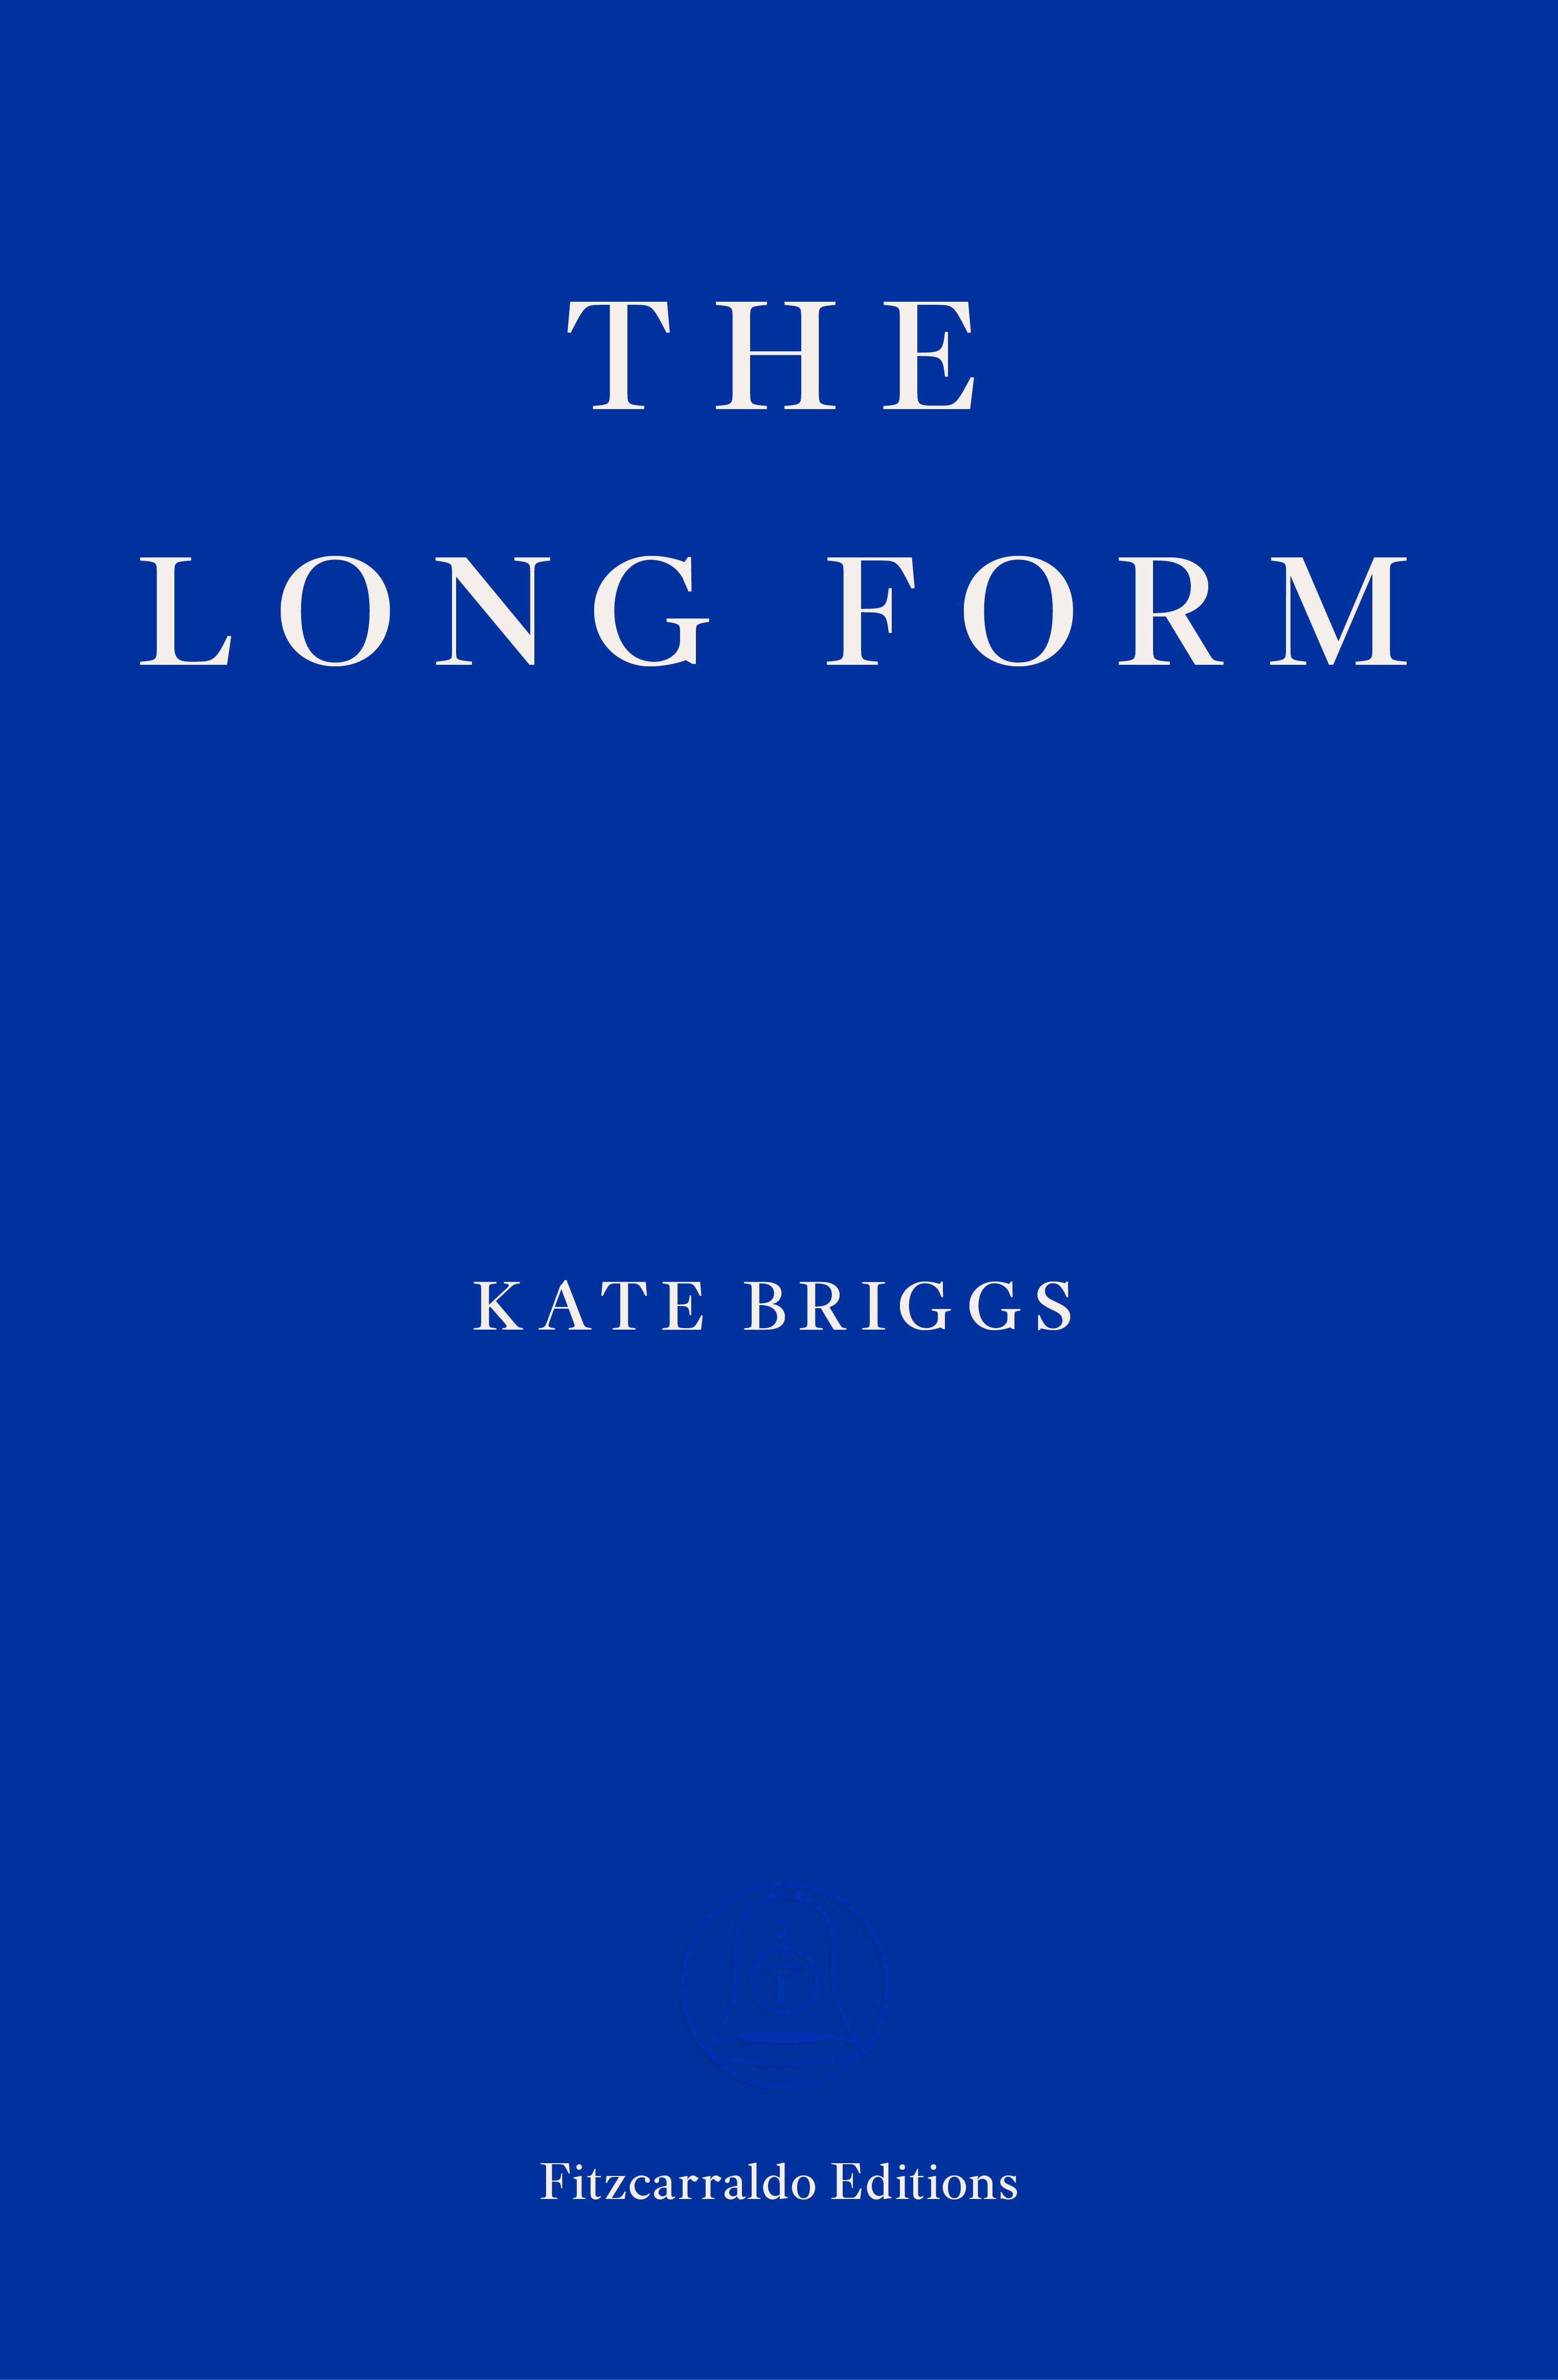 The Long Form with Kate Briggs - Book & Ticket Option